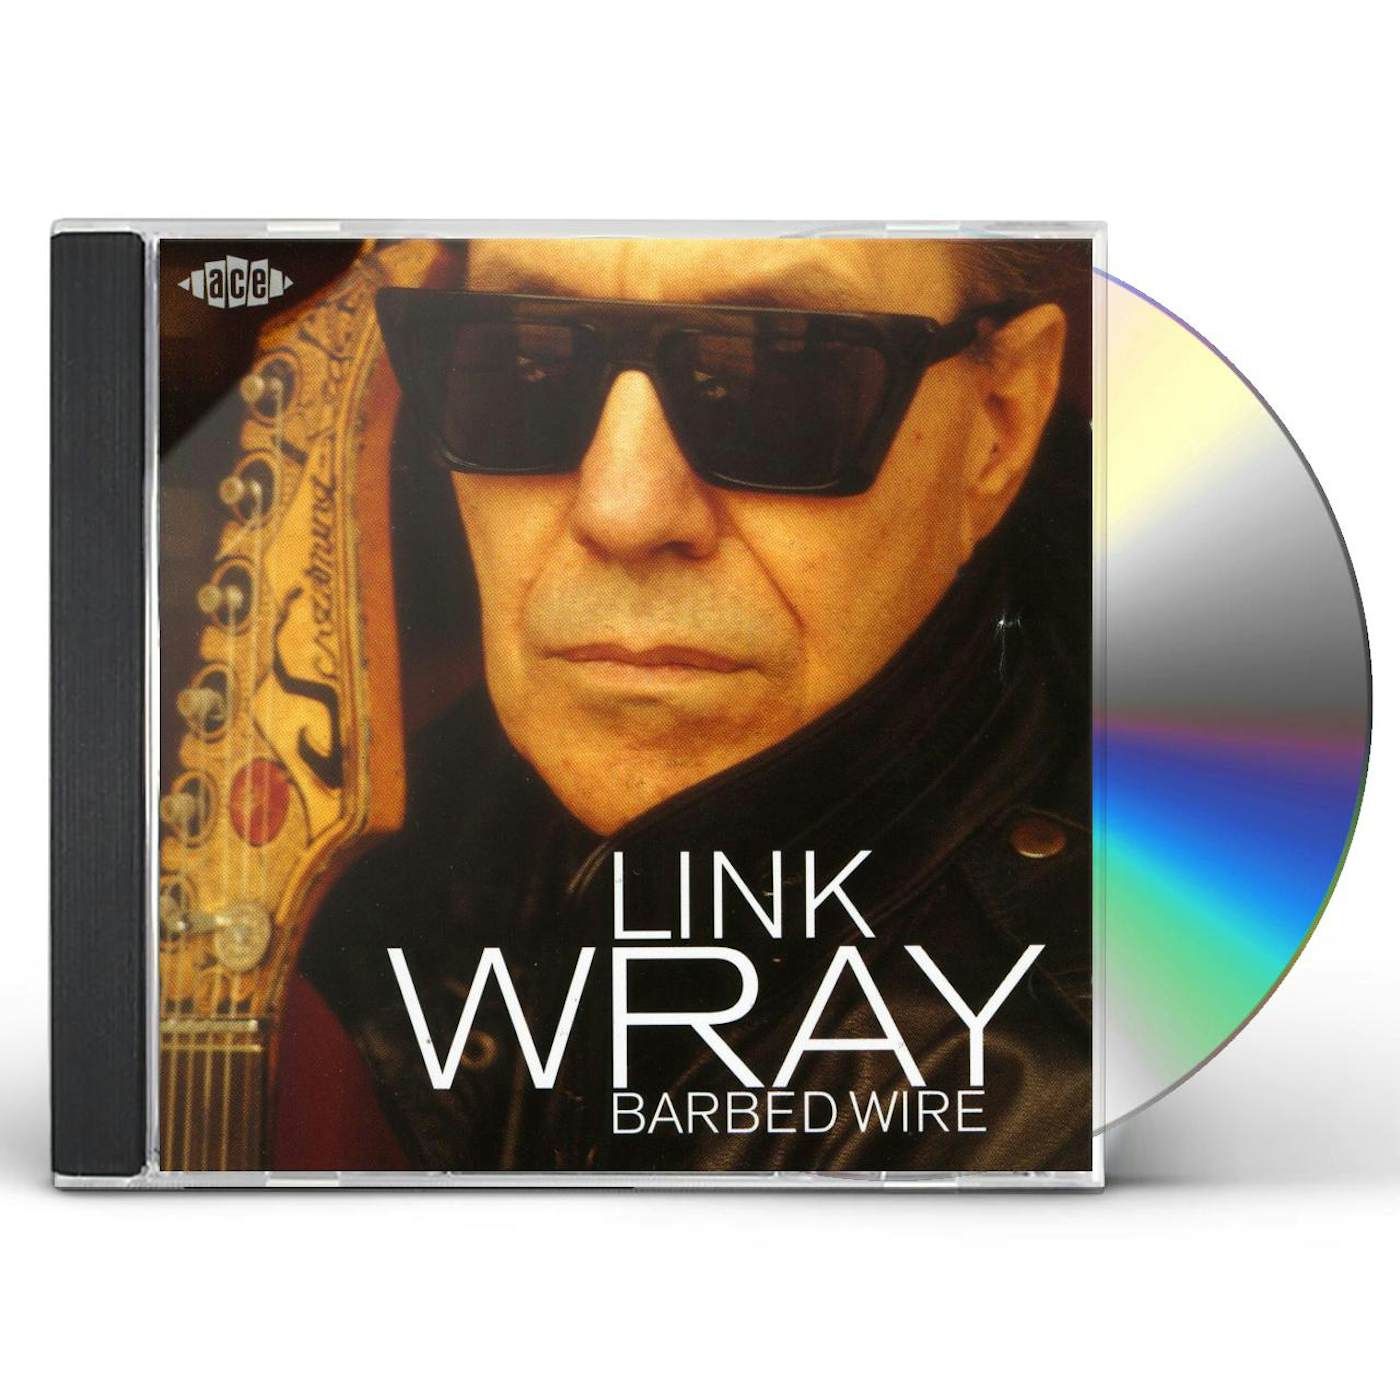 Link Wray BARBED WIRE CD